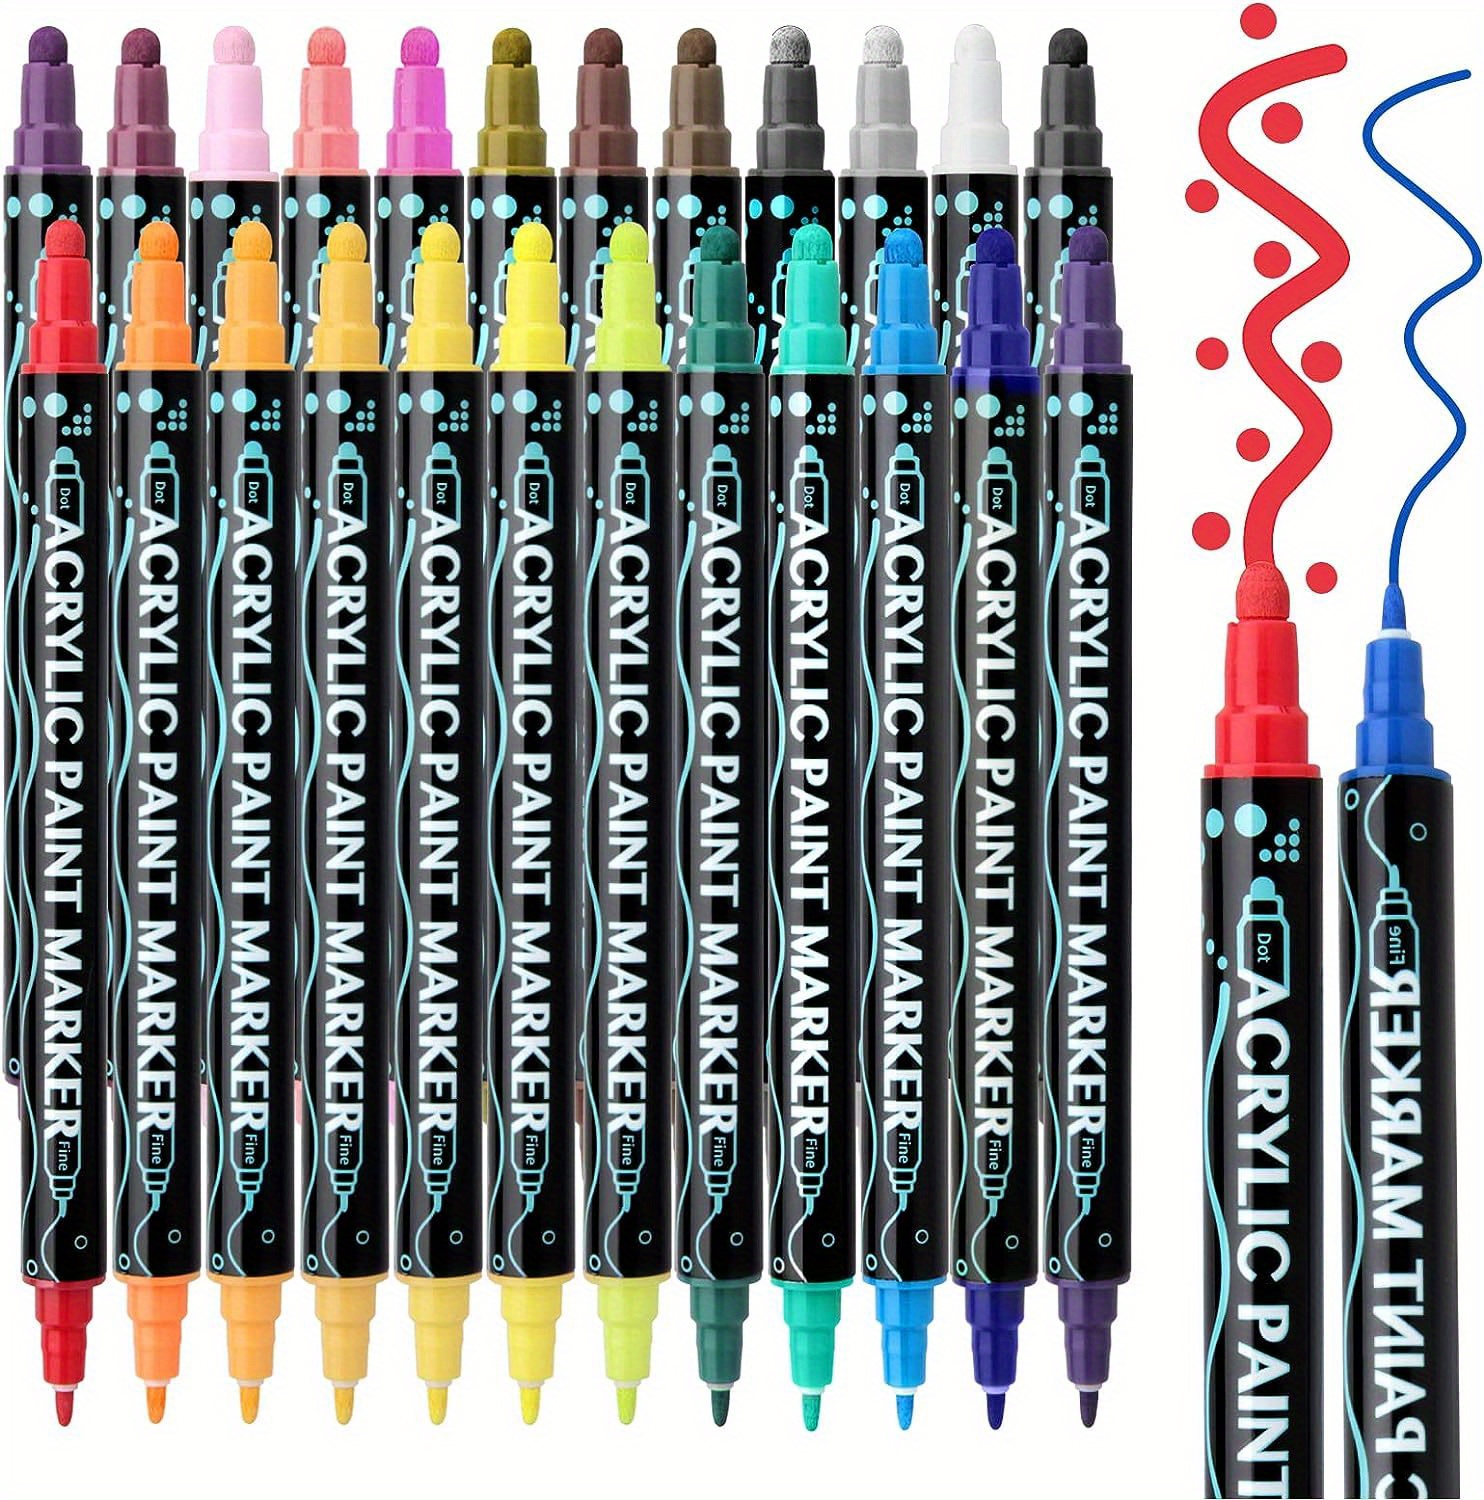 12 Colors Dual Tip Acrylic Paint Pens, 1-5MM Edium Tip and 1 MM Brush Tip,  Permanent Acrylic Markers Pens for Rock